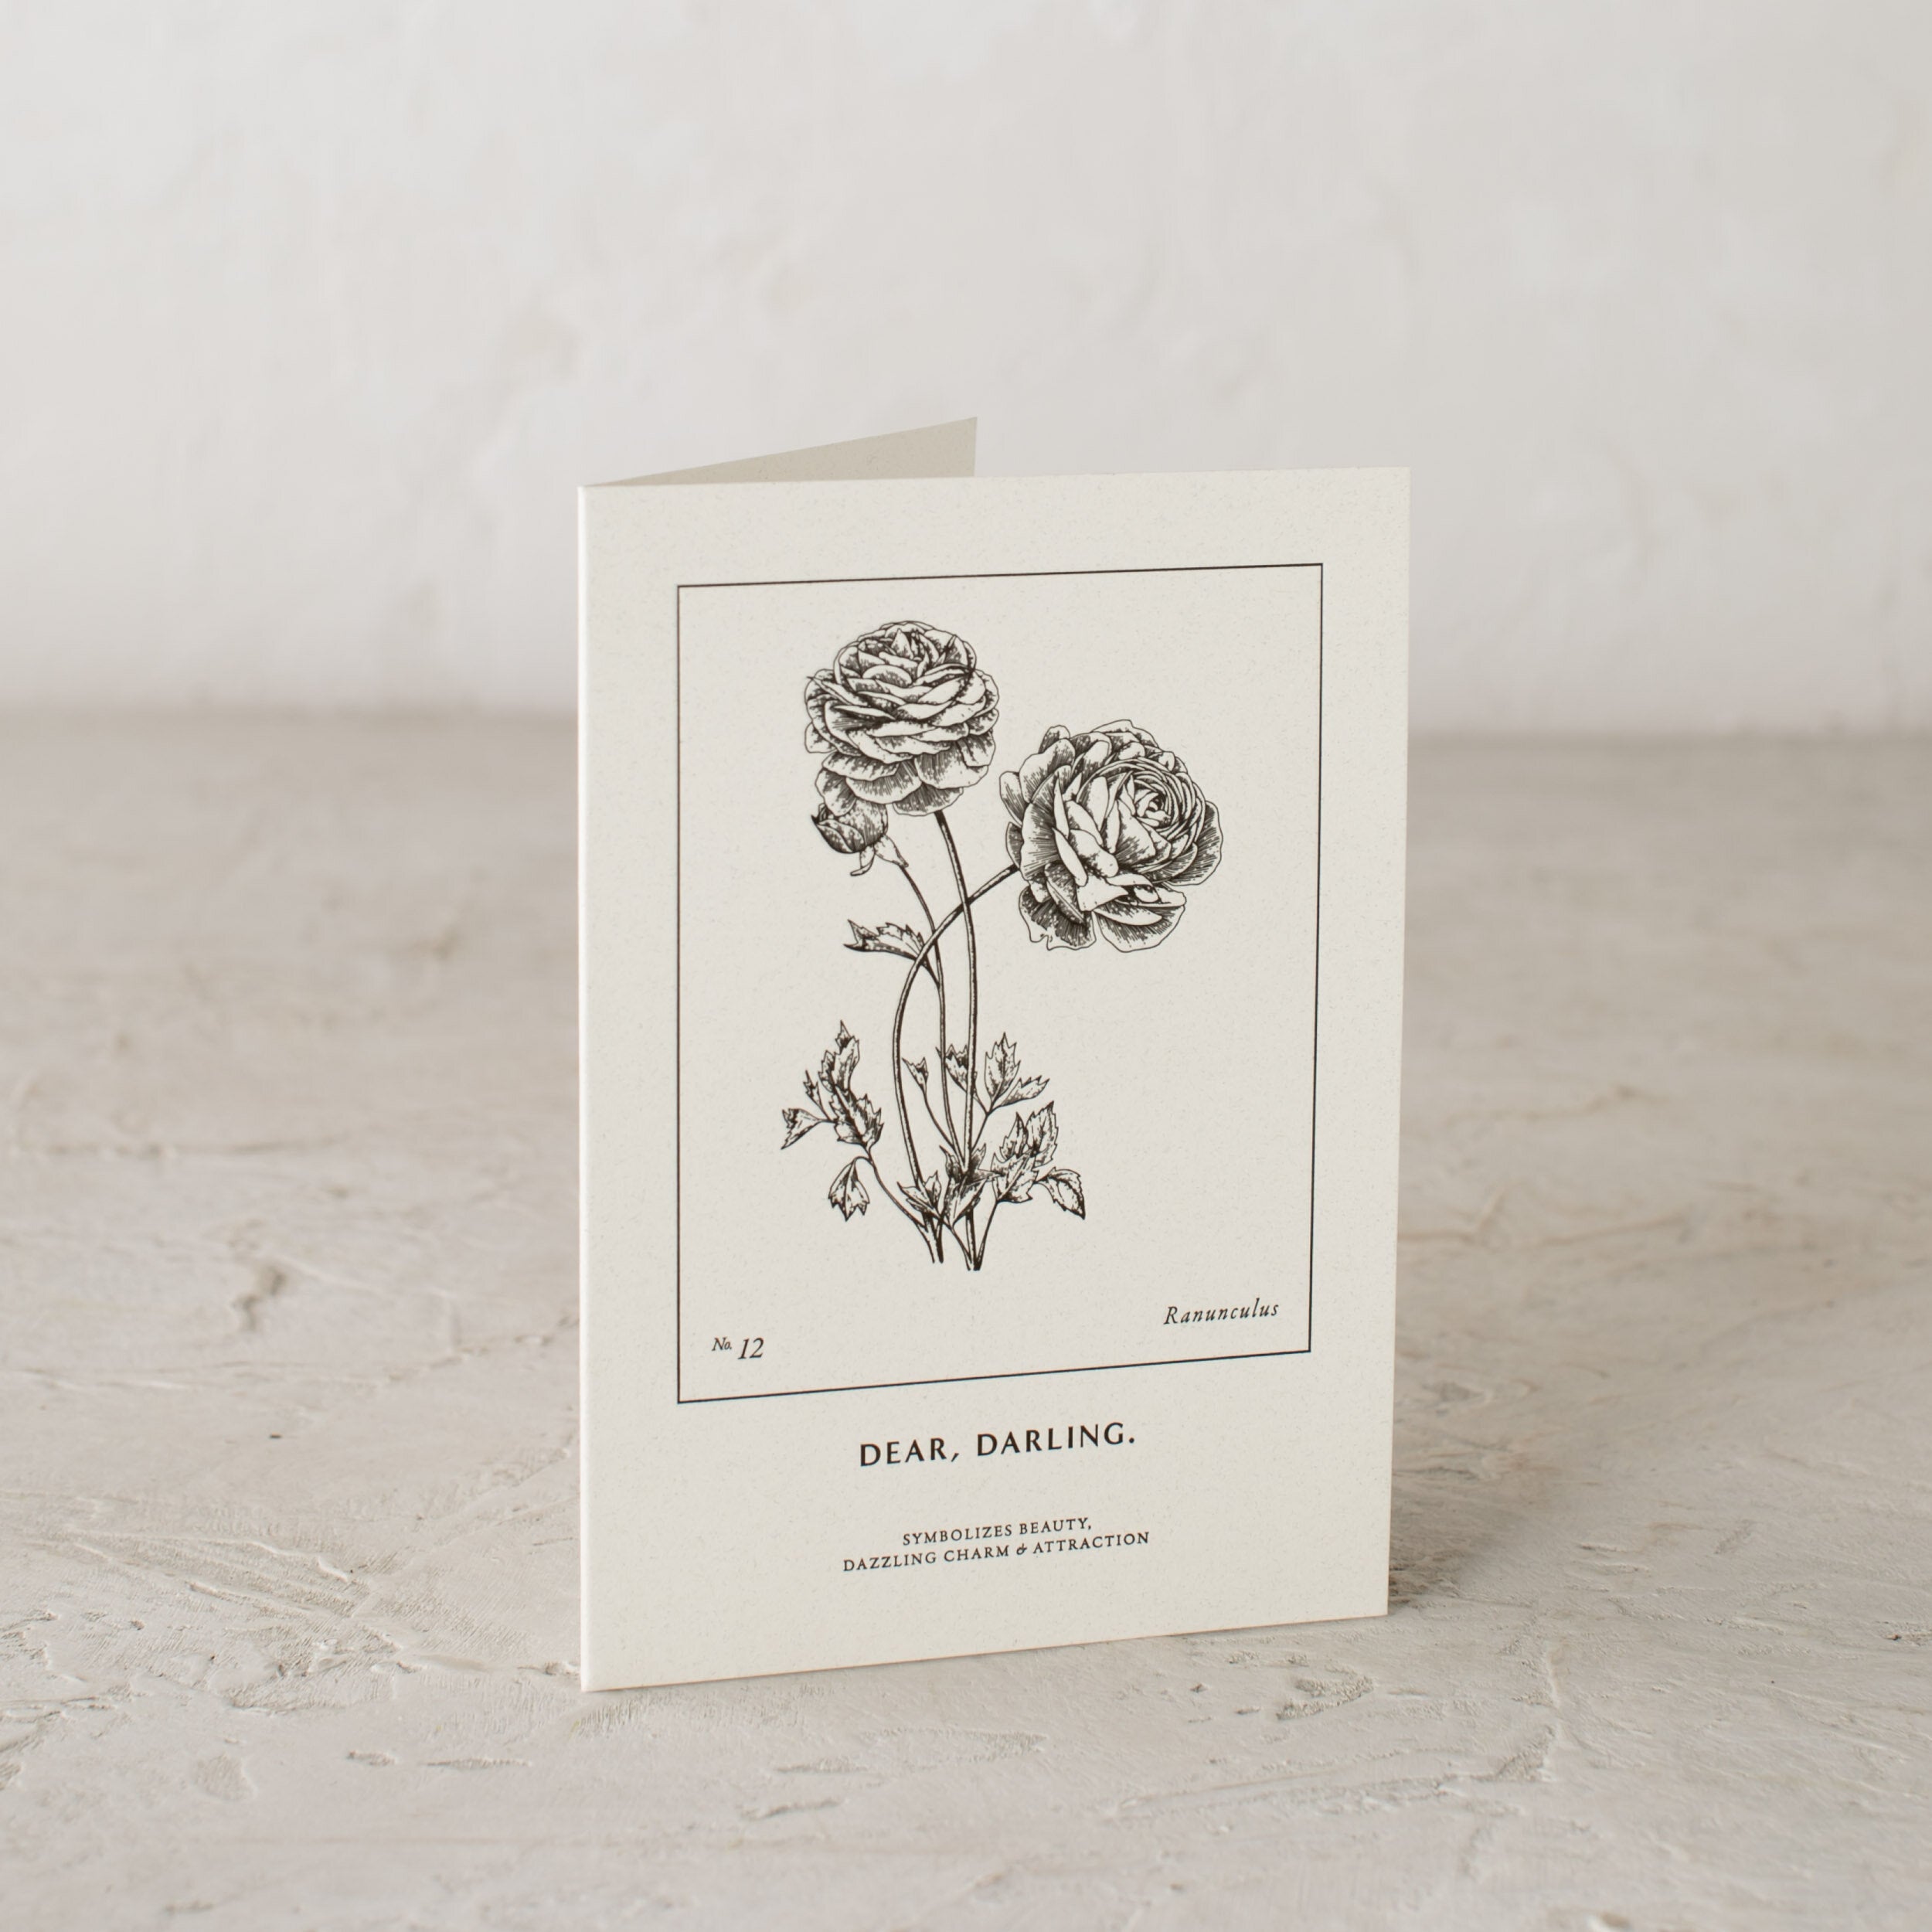 Letter-pressed botanical greeting card. Letter pressed illustration of a Ranunculus. "Dear, Darling." - "Symbolizes Beauty, Dazzling Charm and Attraction" Shop Verdant Kansas City.